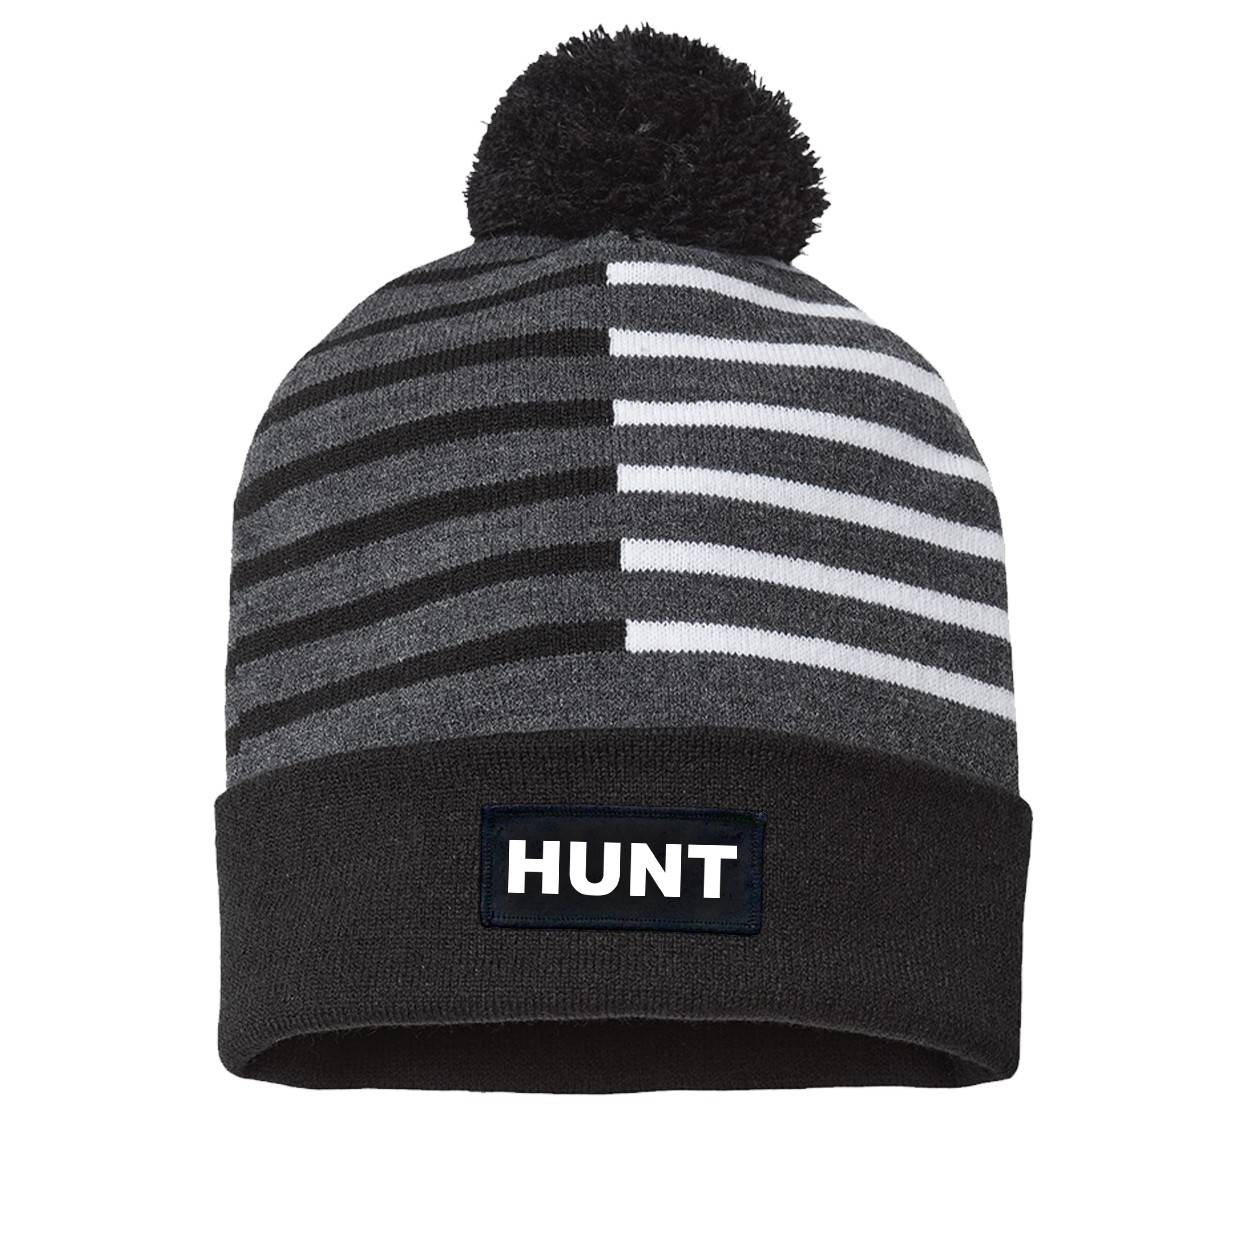 Hunt Brand Logo Night Out Woven Patch Roll Up Pom Knit Beanie Half Color Black/White (White Logo)